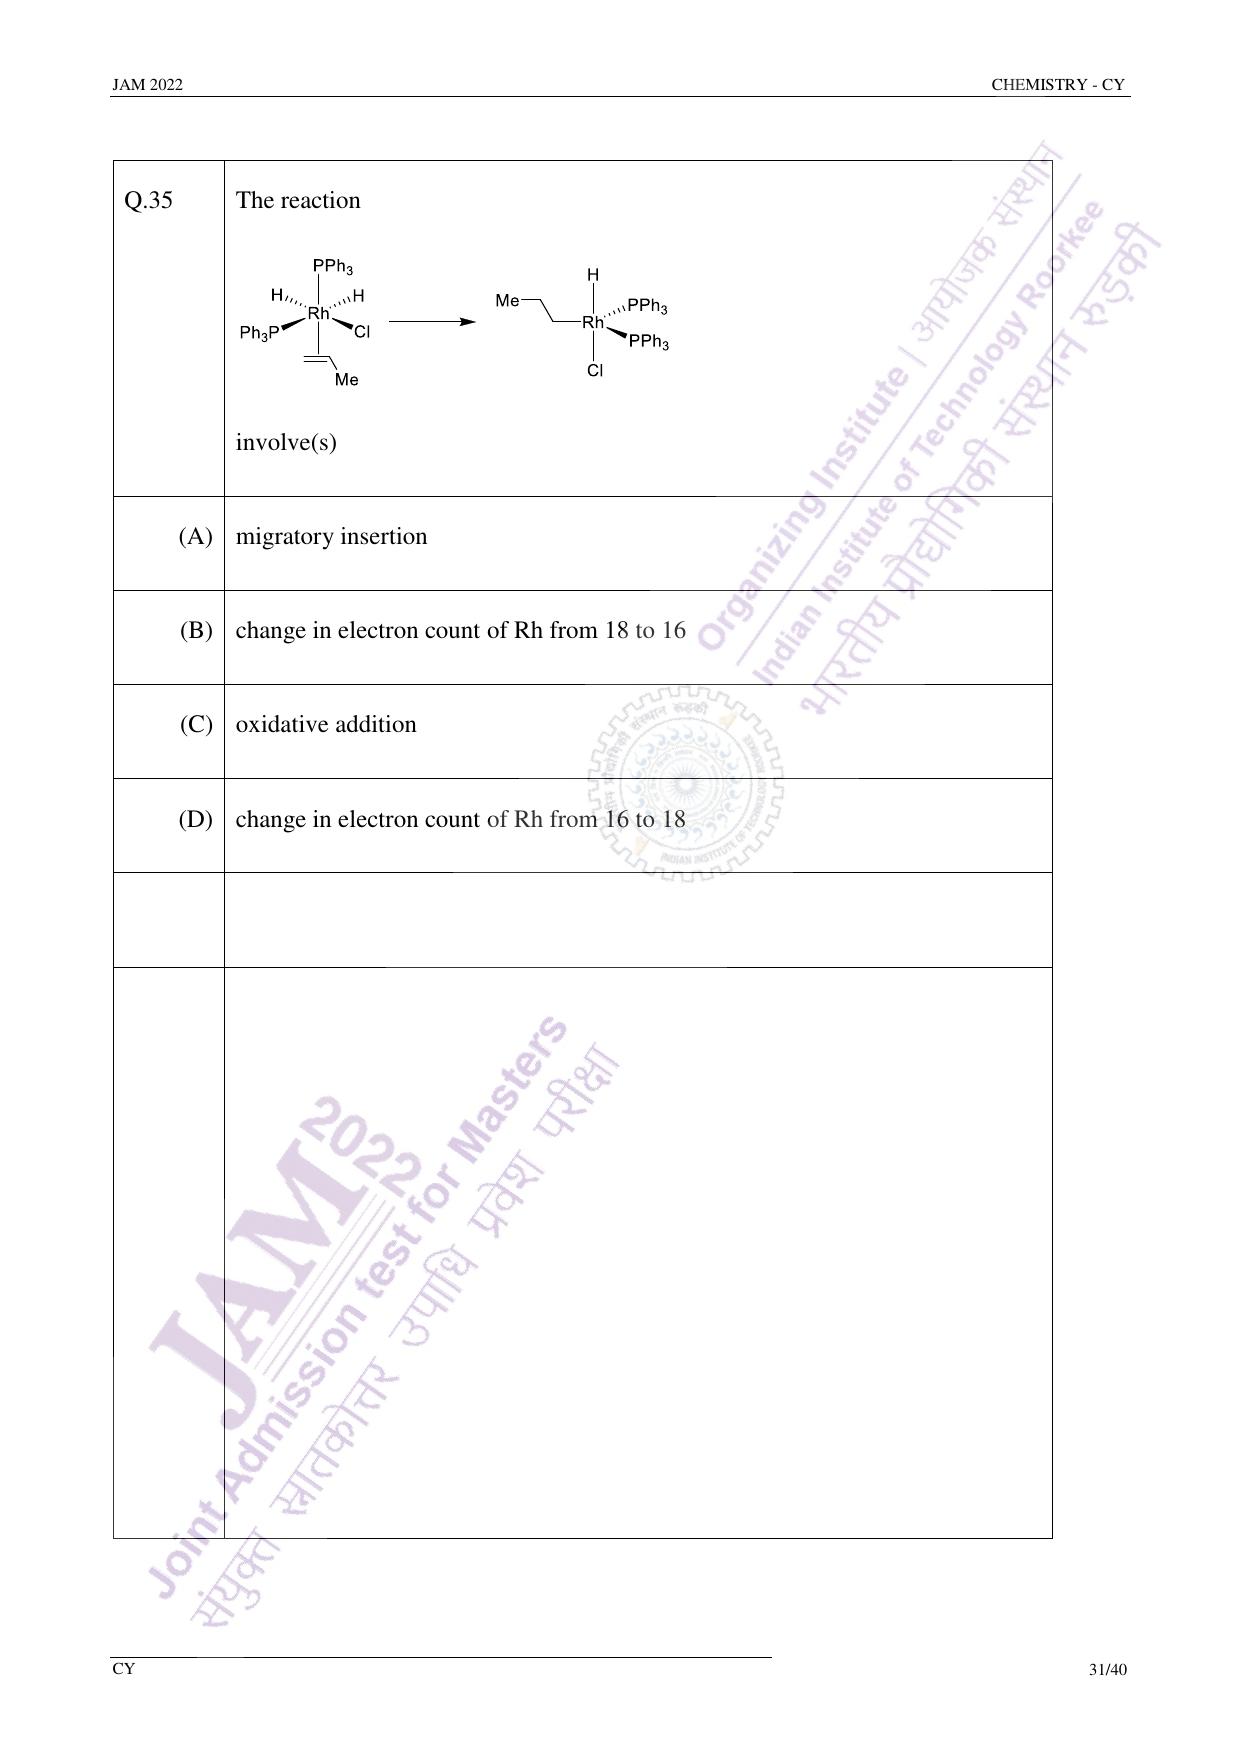 JAM 2022: CY Question Paper - Page 30